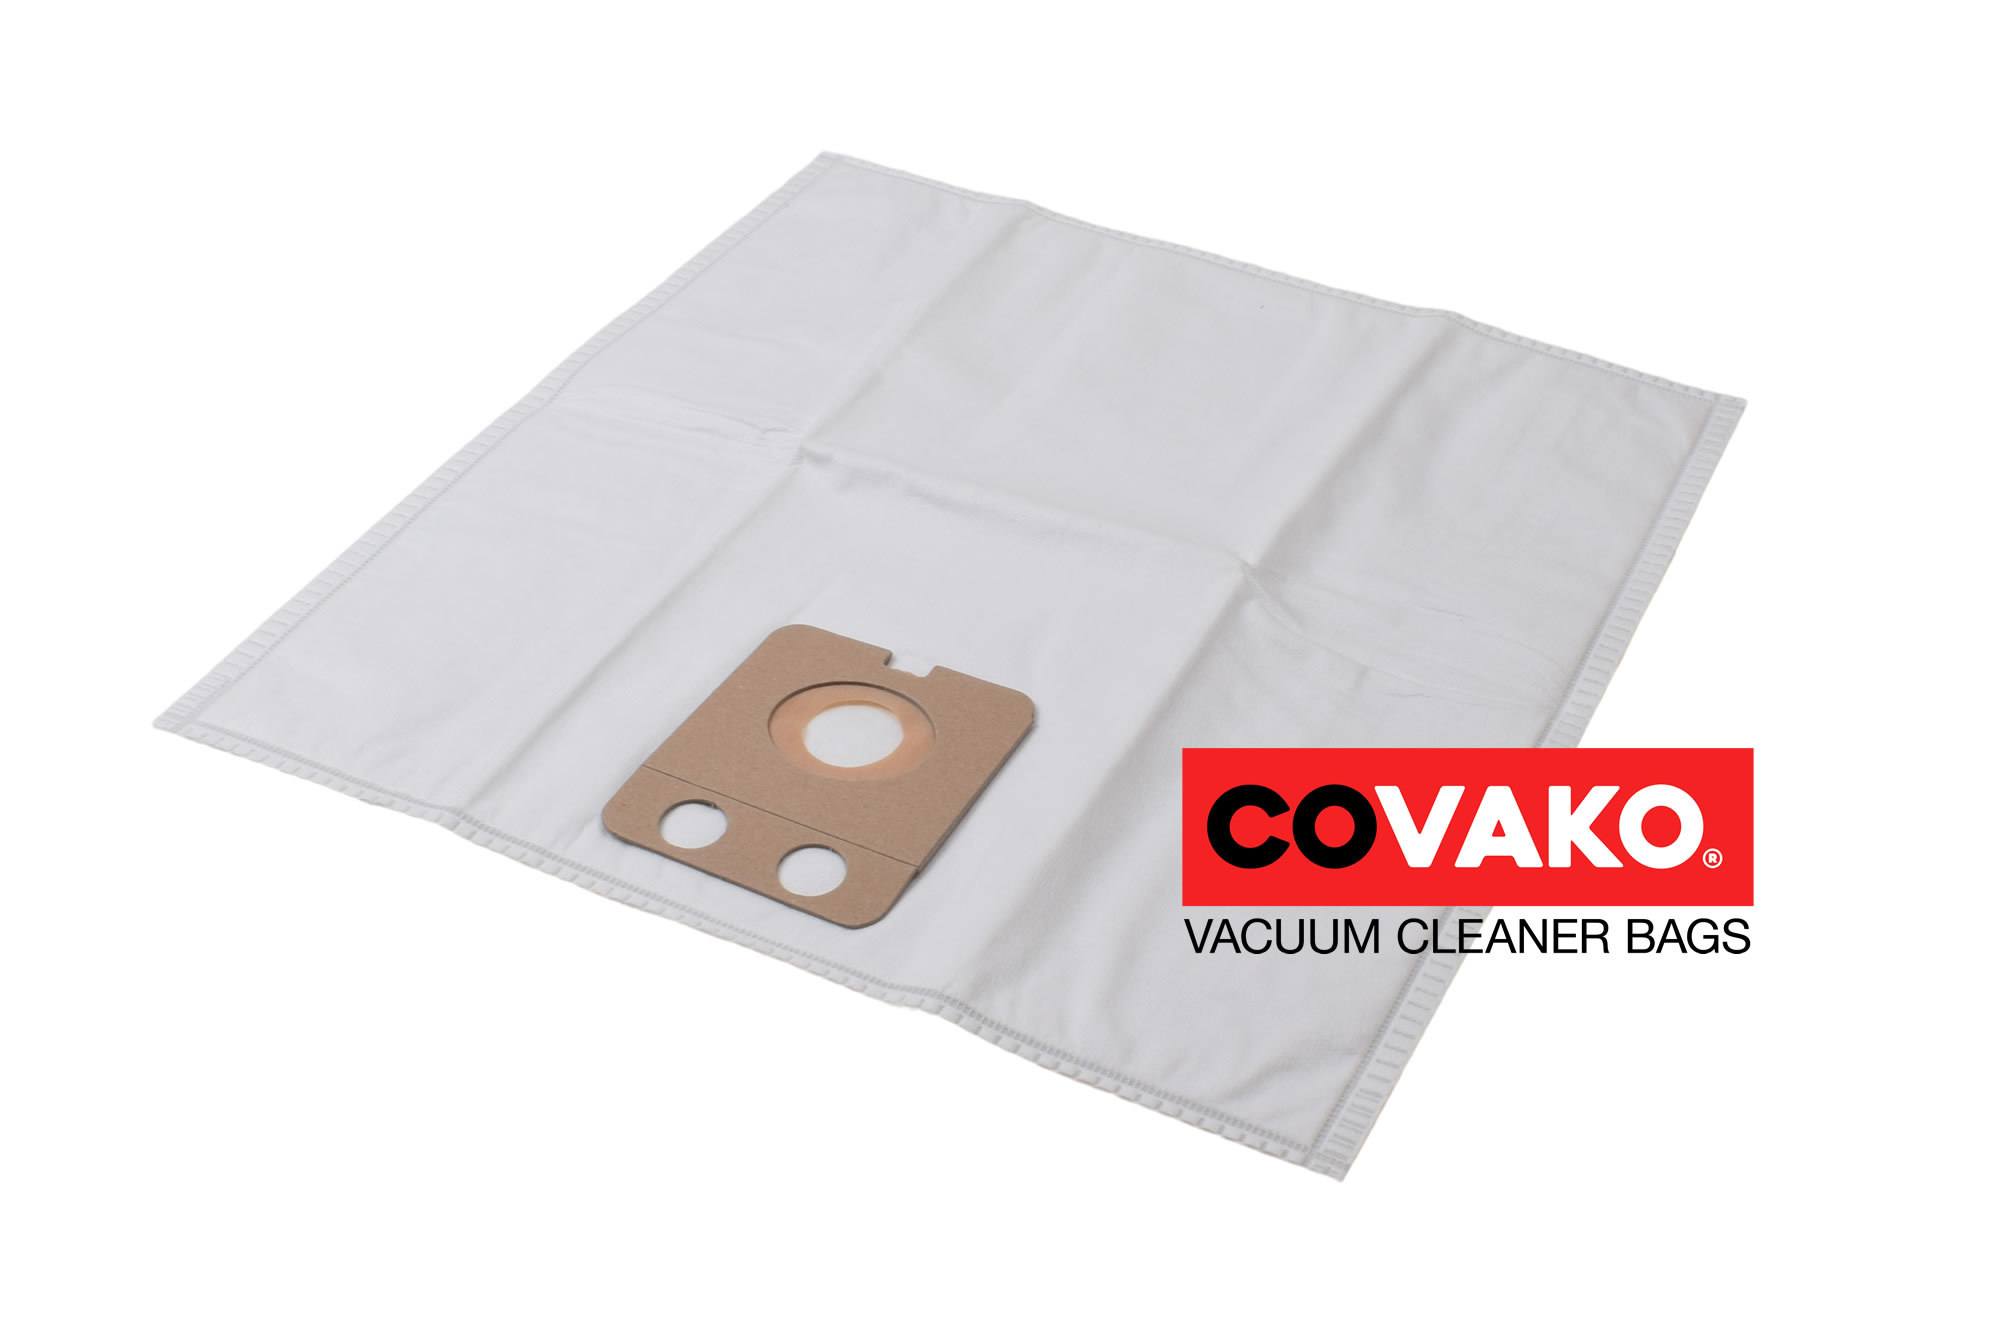 Alto VC 300 / Synthesis - Alto vacuum cleaner bags